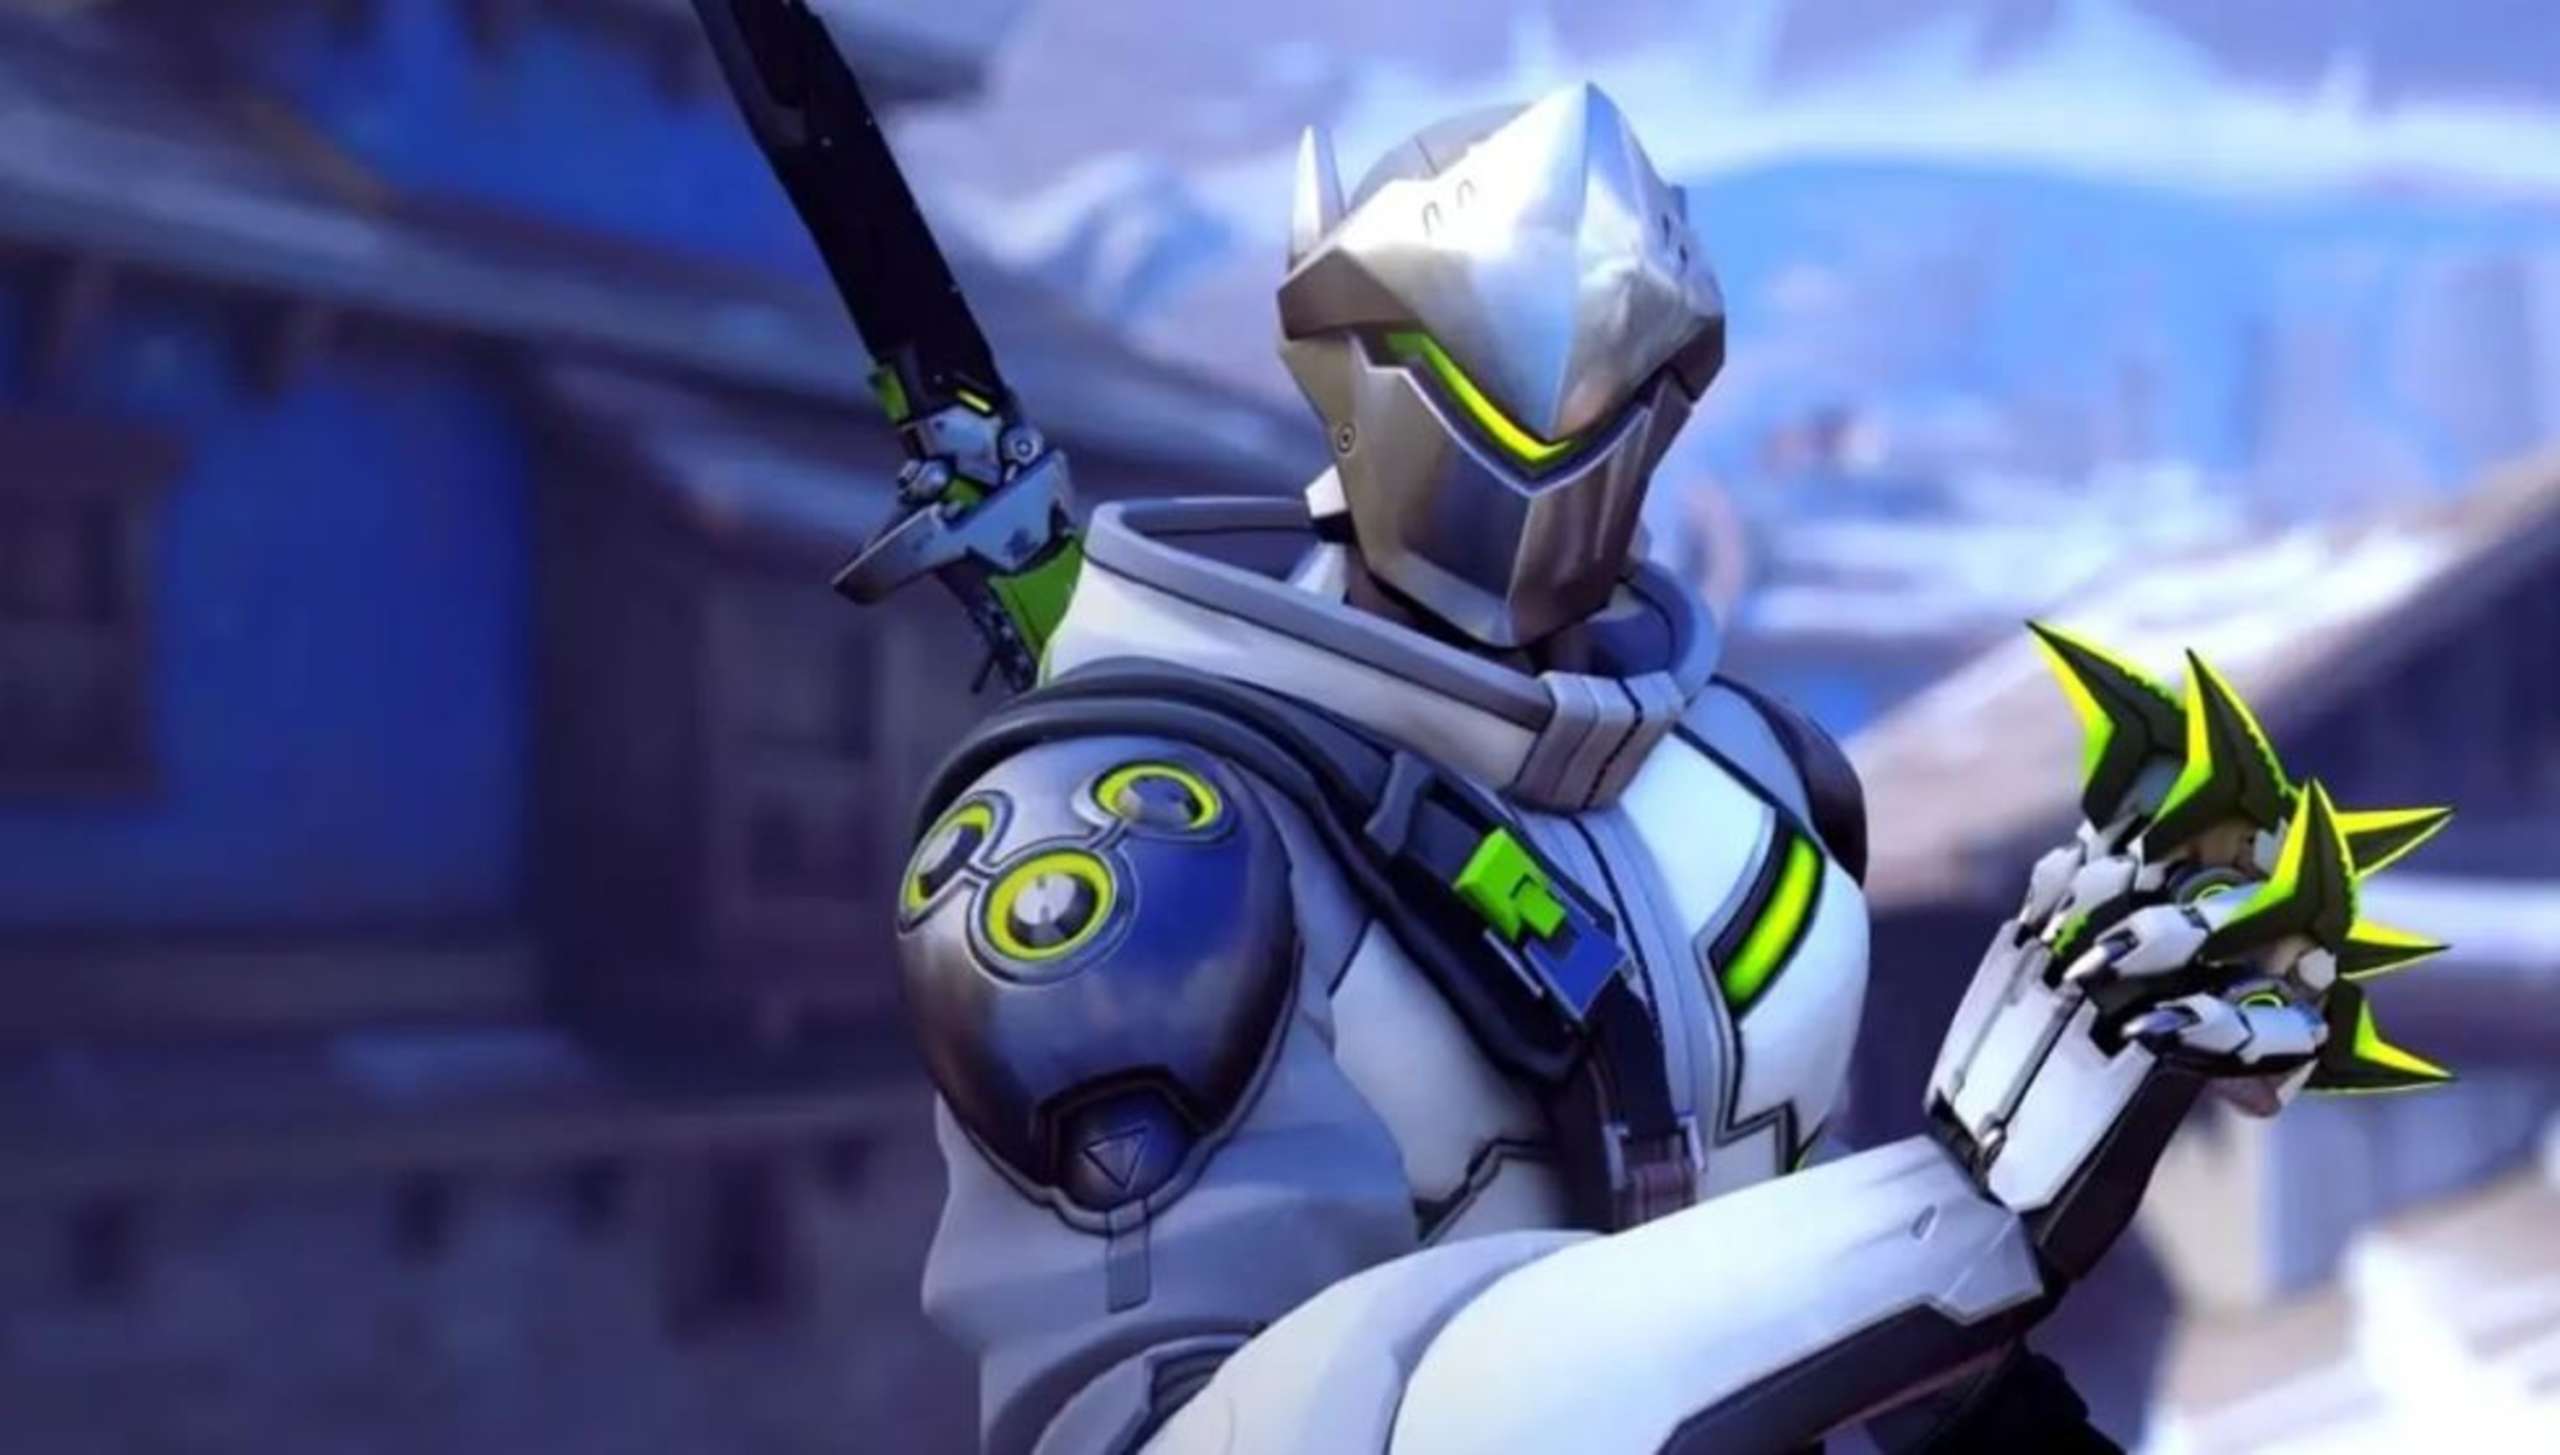 Fans Of Overwatch 2 Aren’t Happy That Blizzard Wants To Weaken Genji As Part Of An Upcoming Balance Patch